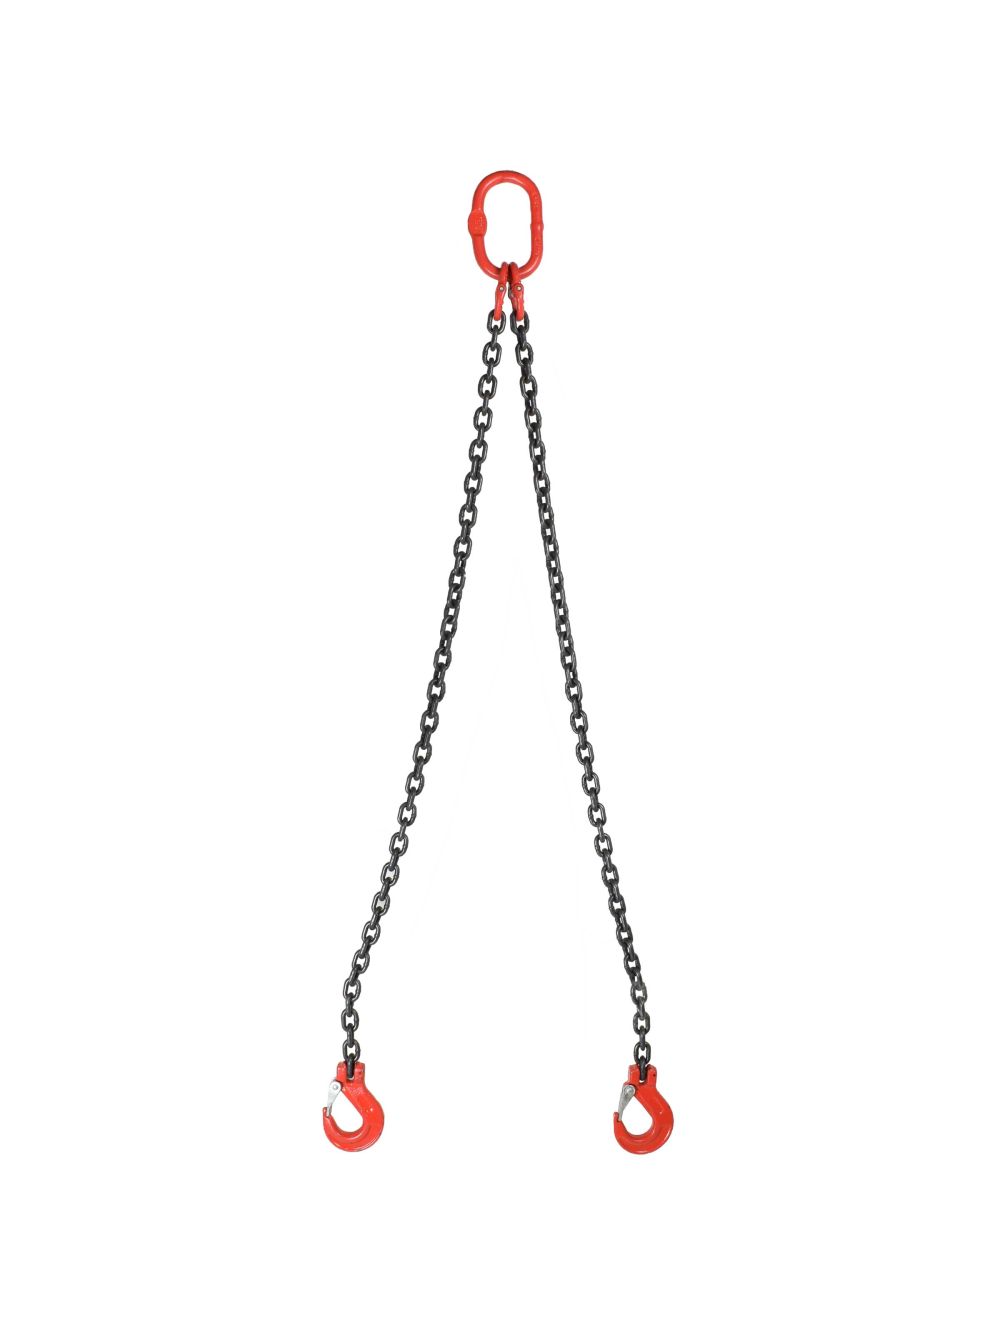 1/2 Chain Size 10 Length Fixed-Leg Mazzella SOG Welded Alloy Chain Sling 12000 lbs Vertical Load Capacity Grade 80 